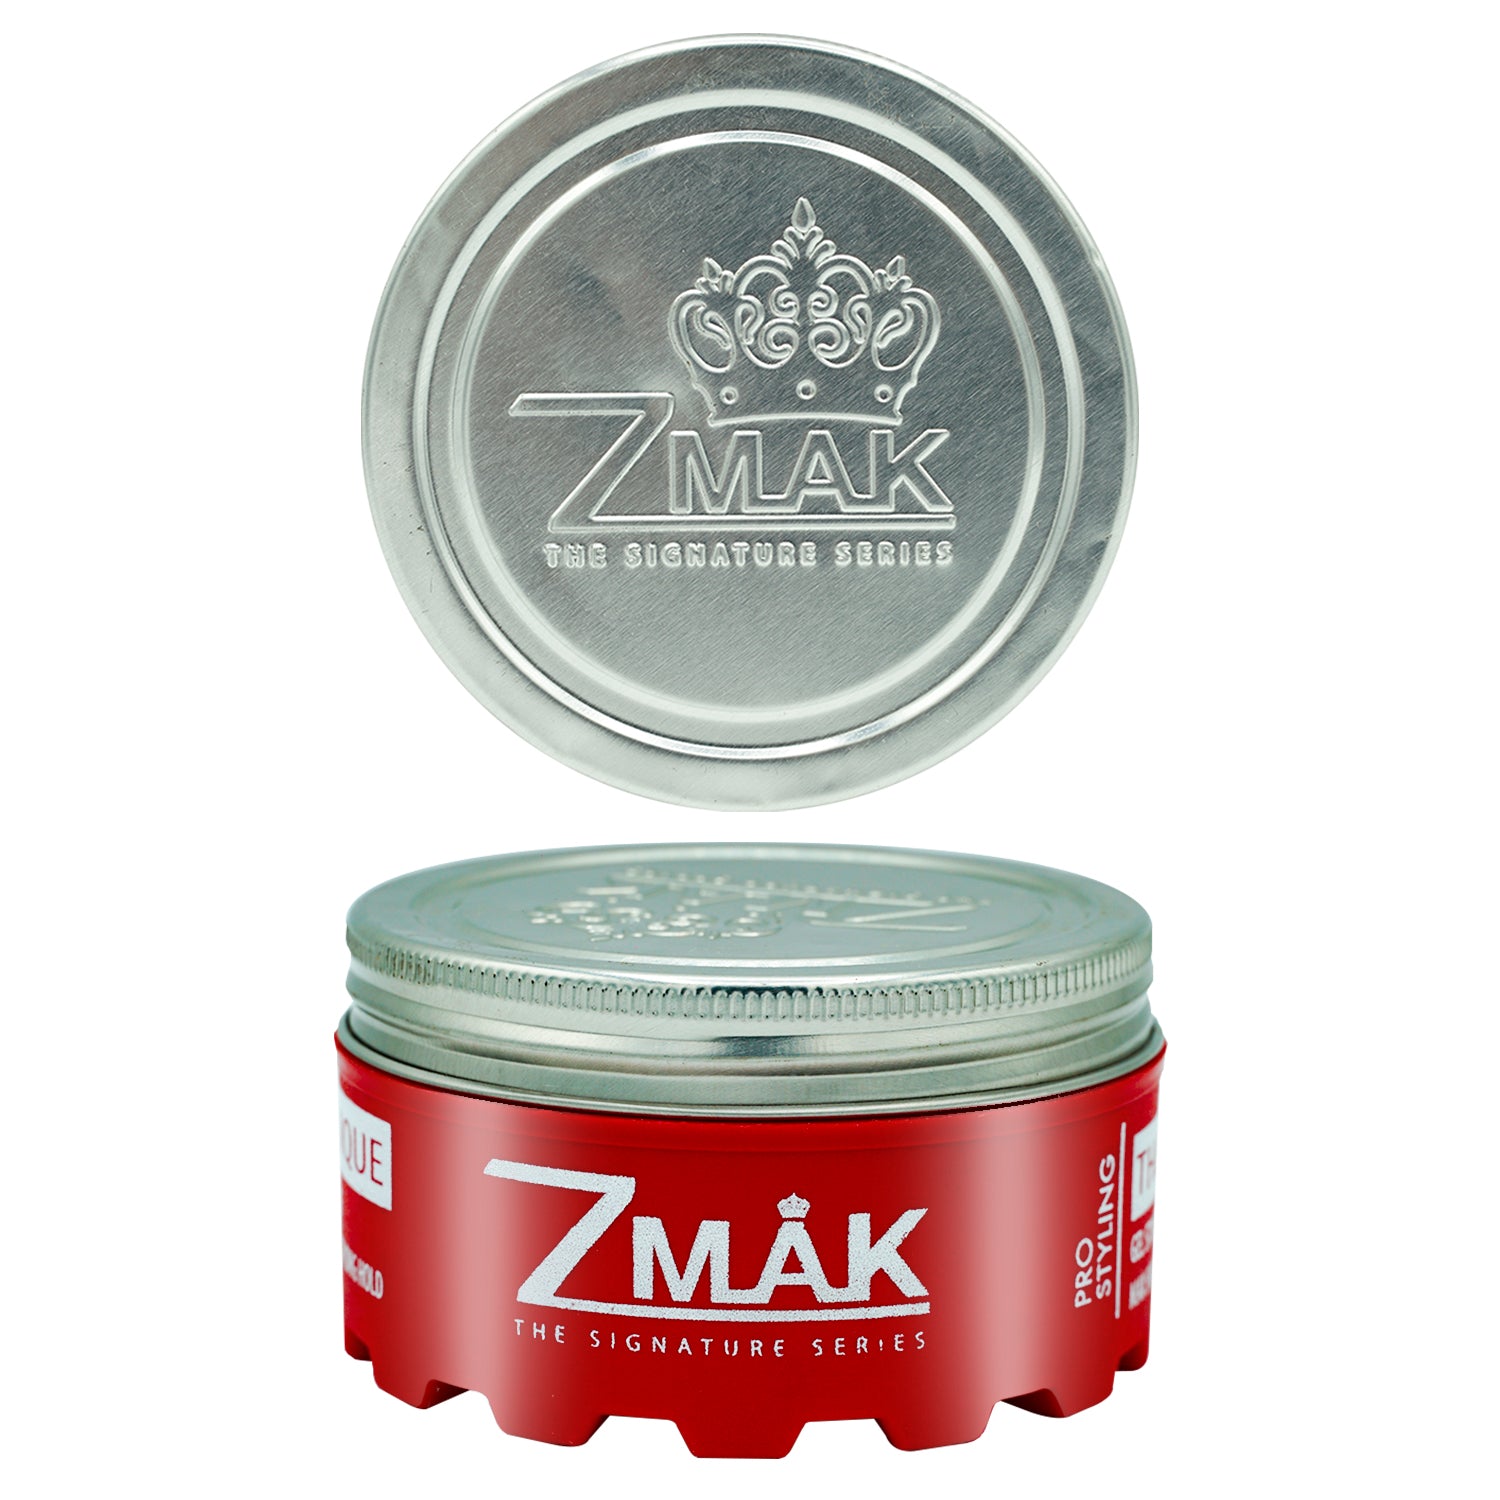 Gel Styling Pomade for Men and Women - Strong Hold and High Shine - Easy to Wash Out - Natural & Organic - Add Volume and Texture (150 ML) - 3 Pack of The Unique - ZMAK The Signature Series